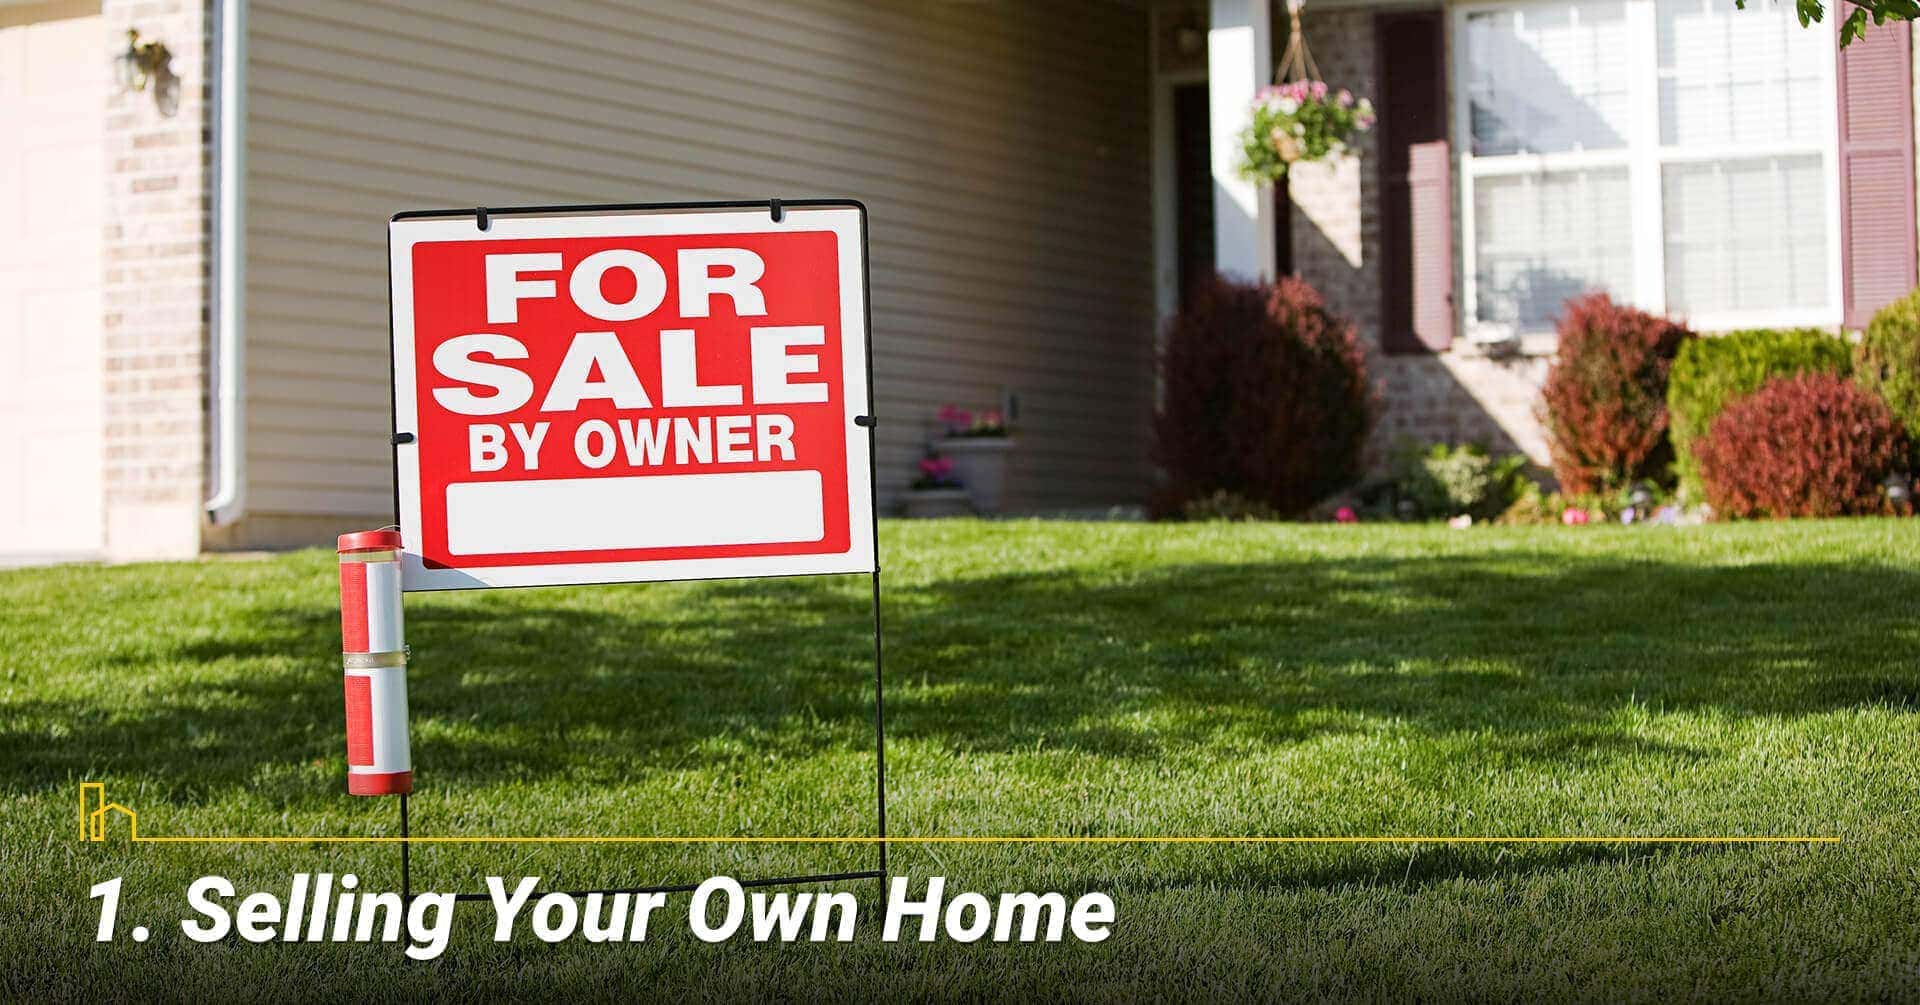 Selling Your Own Home, for sale by owner